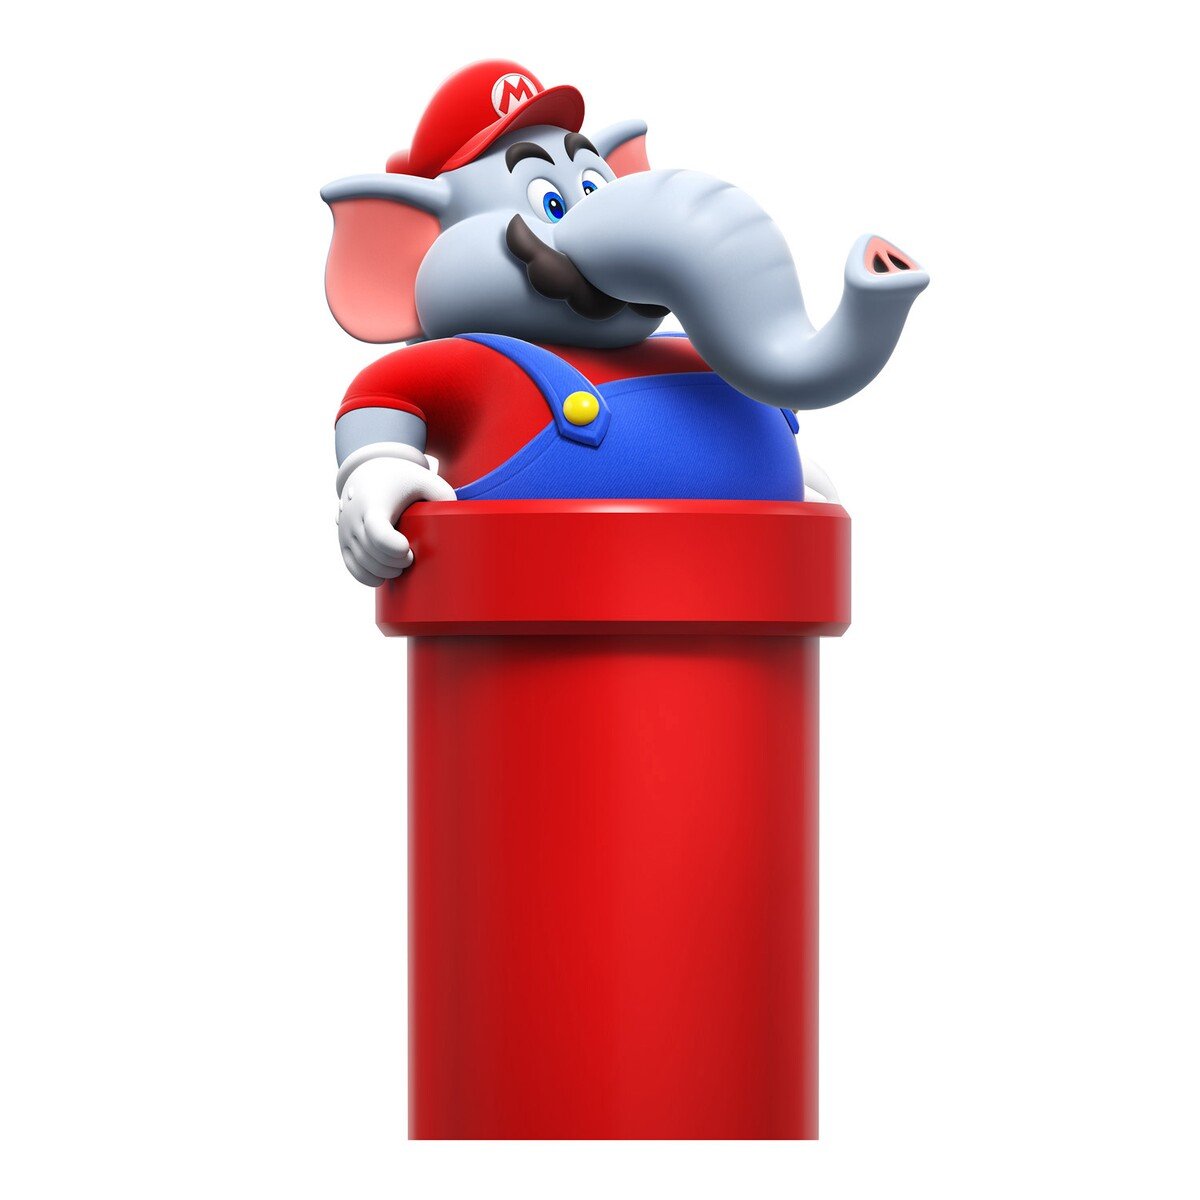 https://mario.wiki.gallery/images/thumb/6/61/SMBW_Elephant_Mario_Artwork.jpg/1200px-SMBW_Elephant_Mario_Artwork.jpg